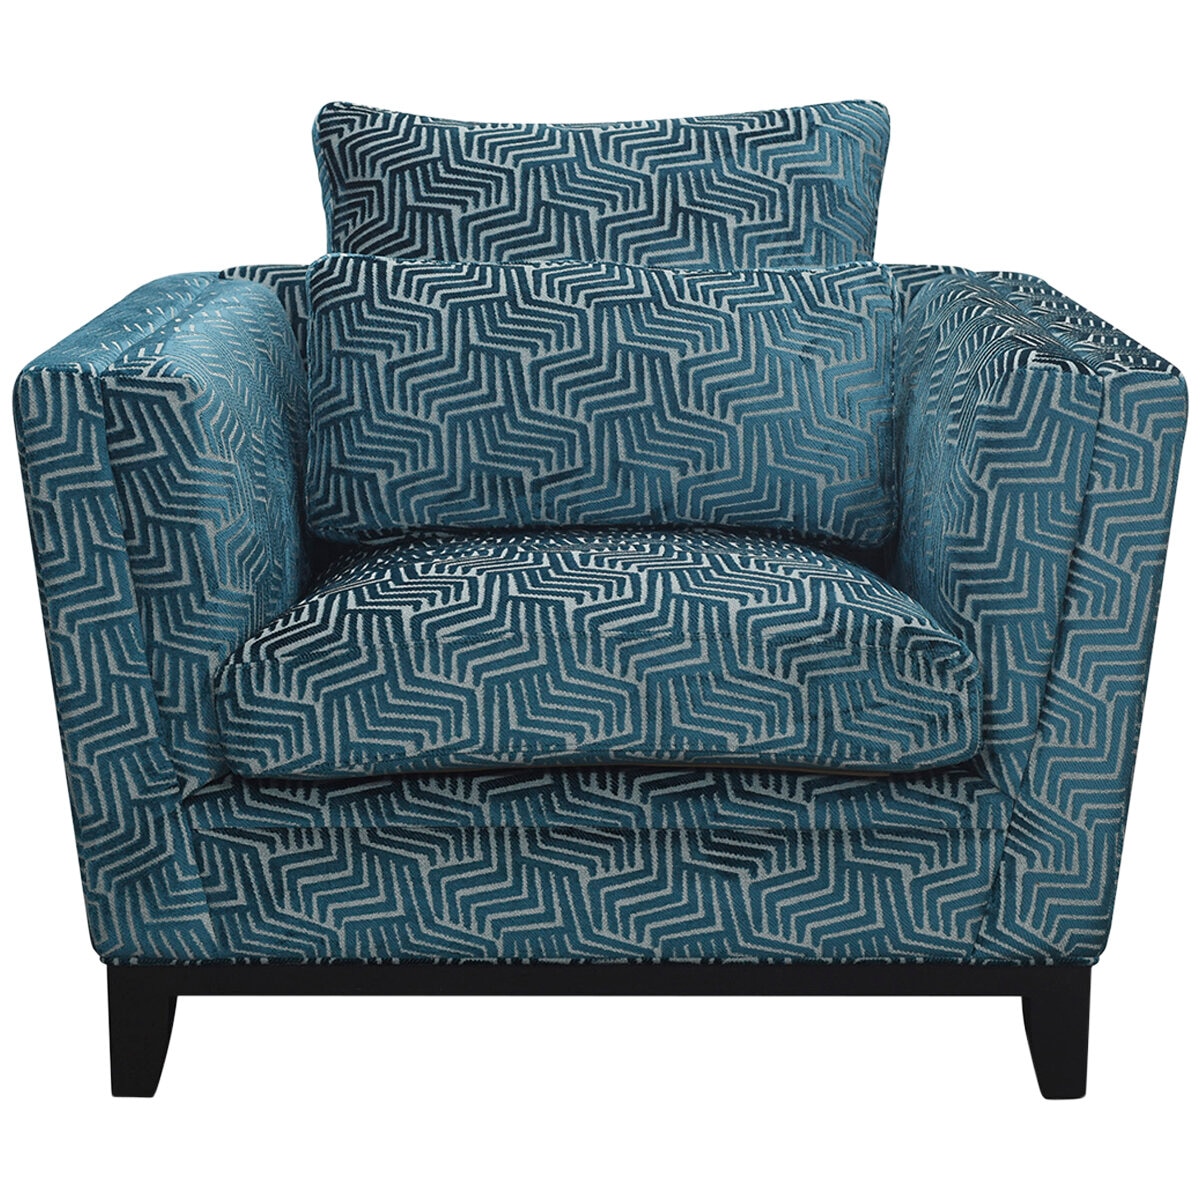 Moran Florence Fabric Chair 2 pack Teal